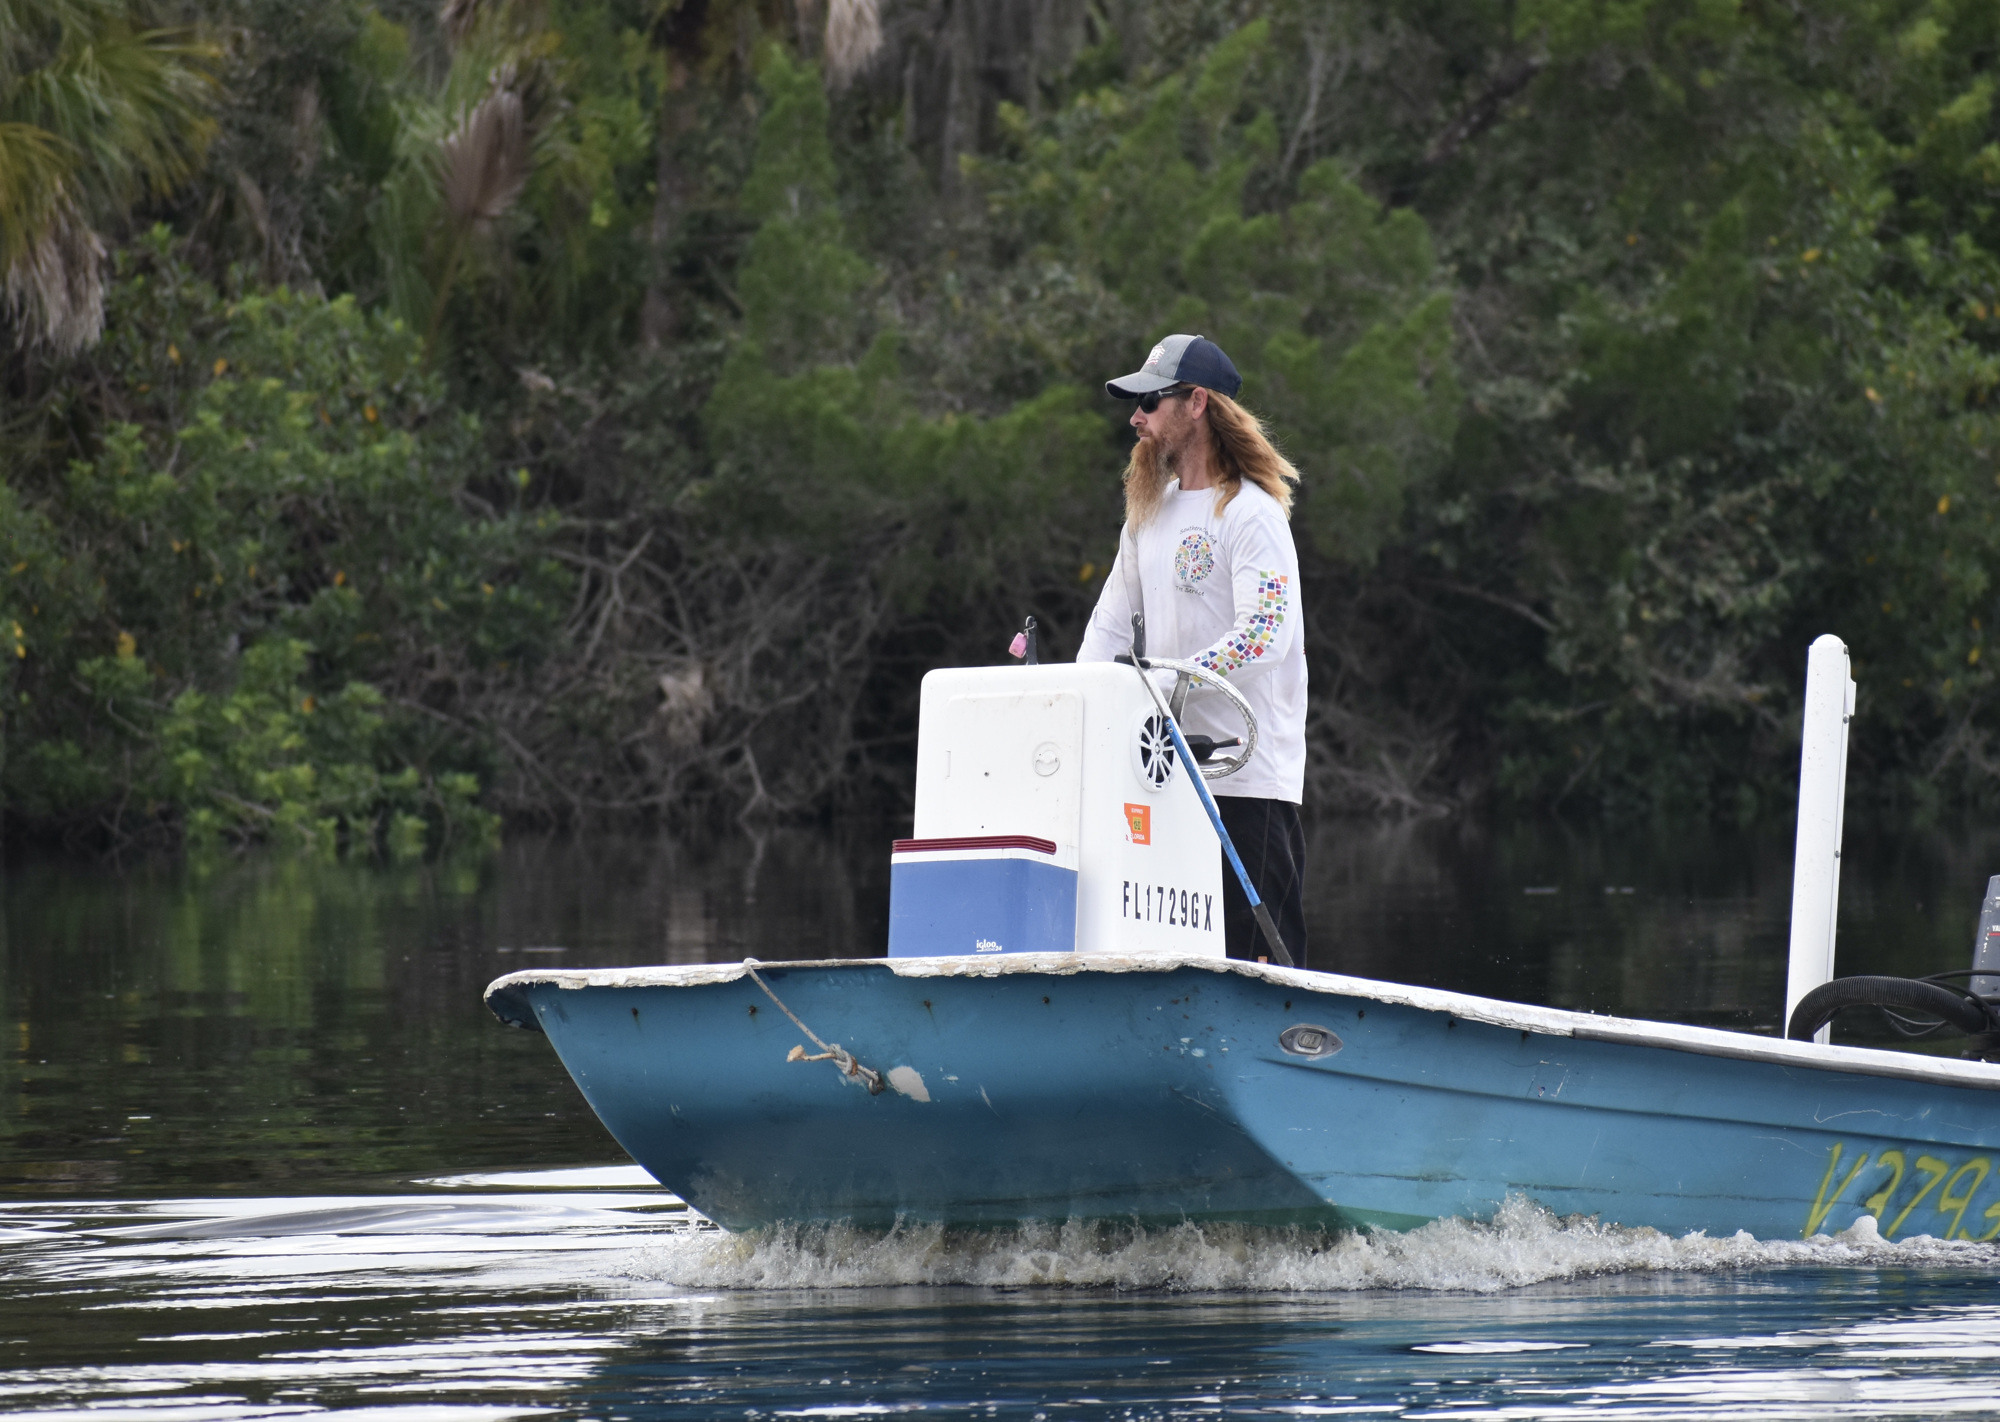 East County's Paul Caruso, a crab fisherman, heads into the Manatee River on Monday to pick up some of his deeper traps, a precaution he last took before Hurricane Irma in 2017. (Photo by Ian Swaby)